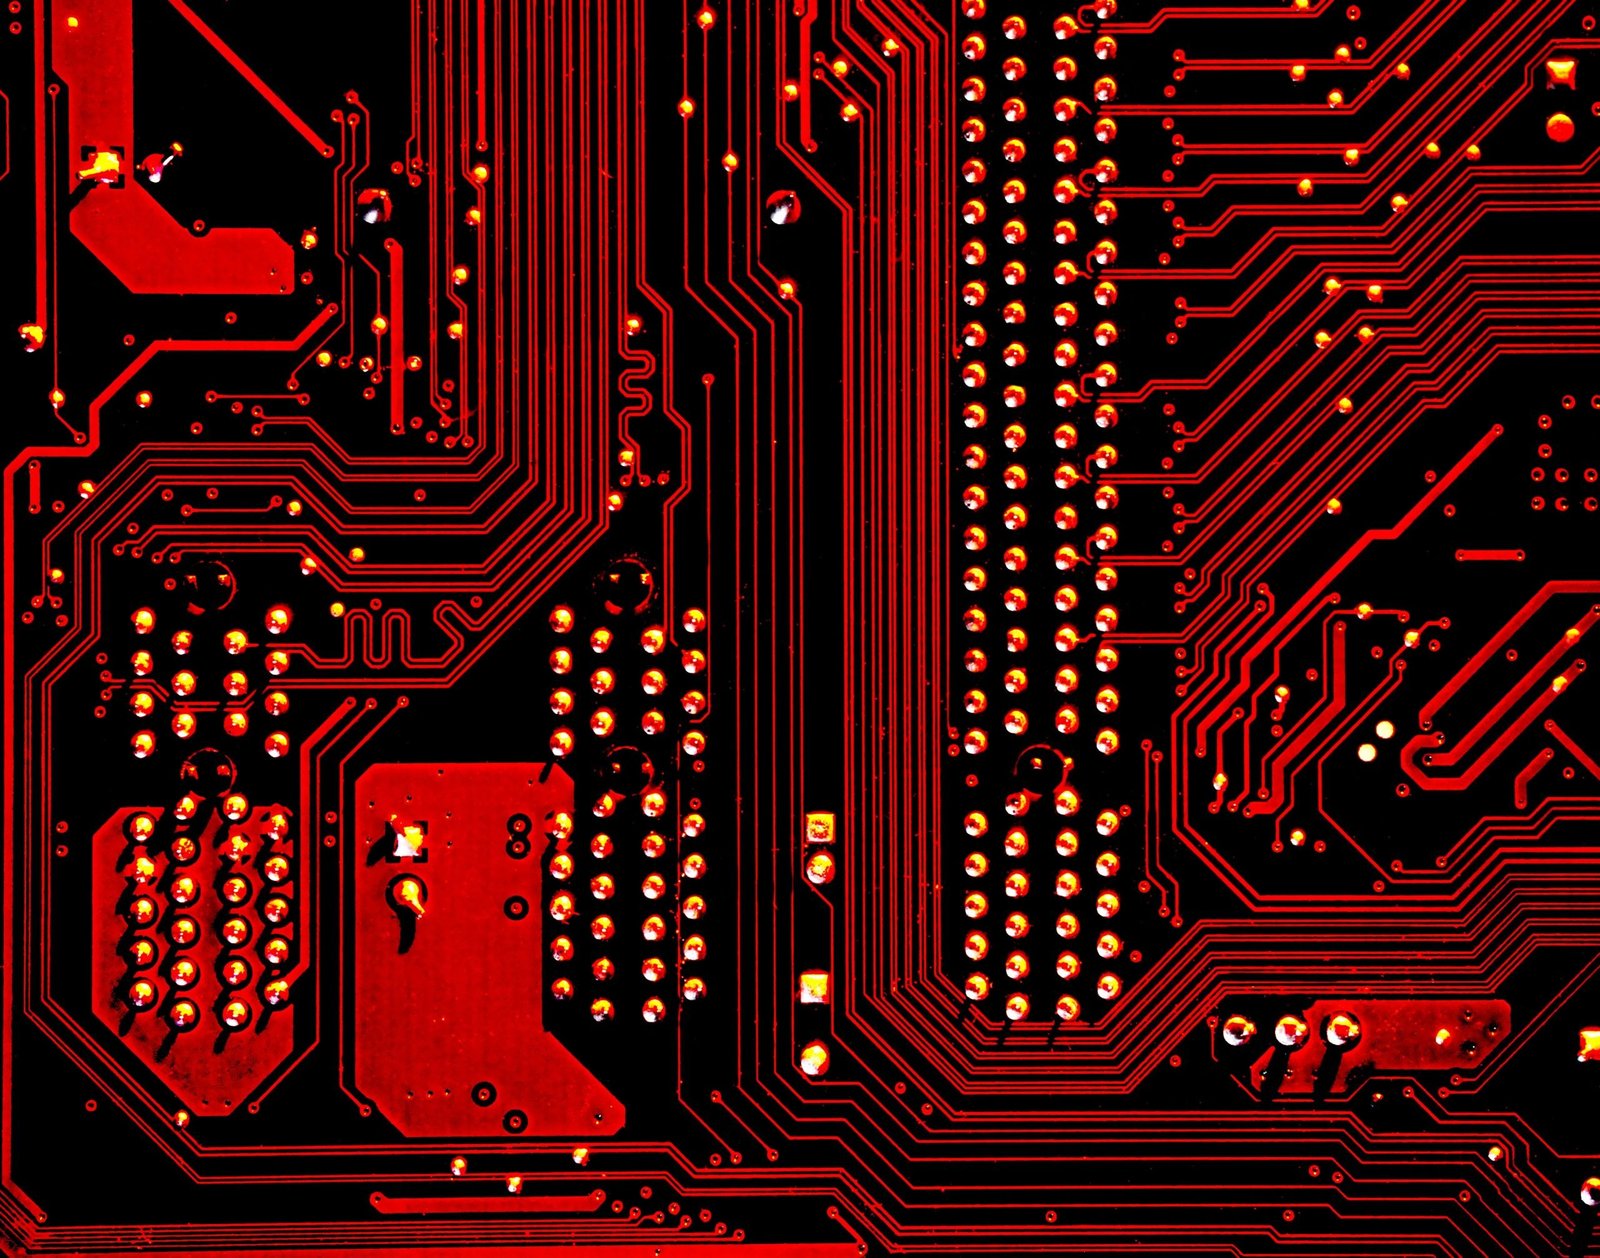 zoomed up view of a computer chip with red lighting